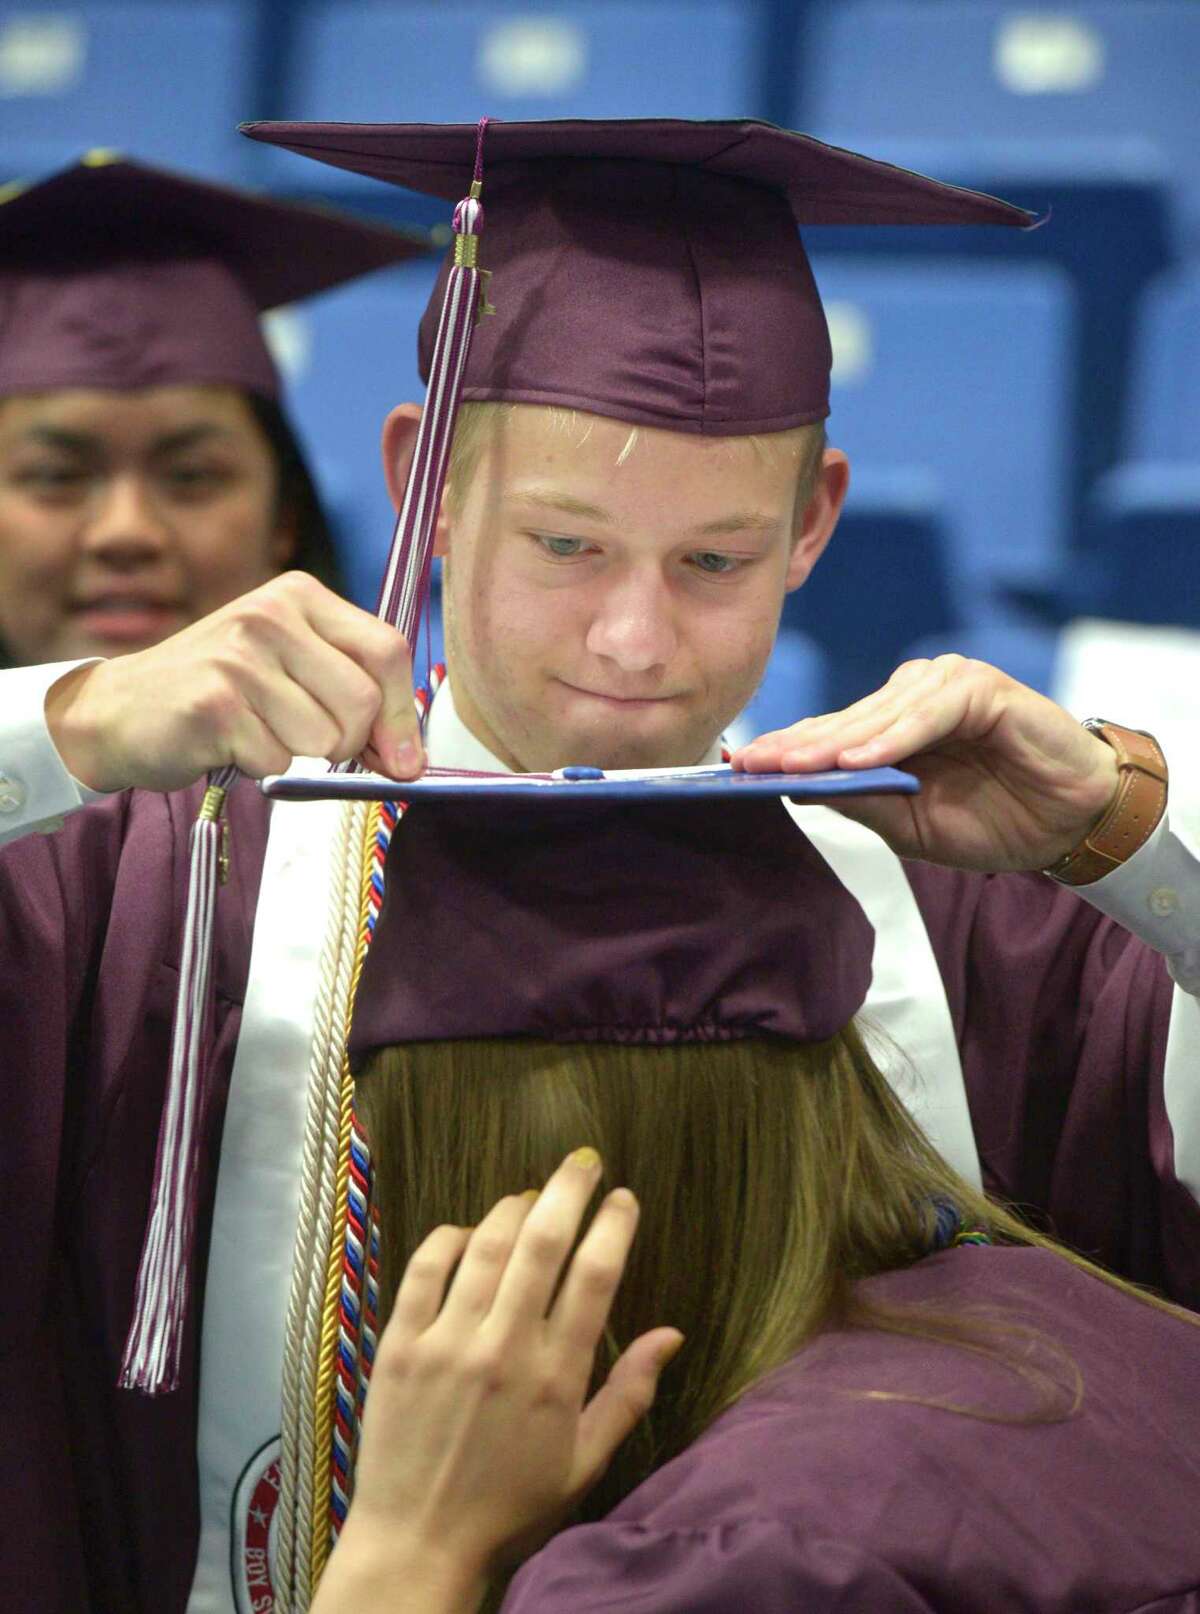 Matthew Evan Canfield makes a last minute adjustment to Veronica Elizabeth Breen's tassel before the Bethel High School Class of 2019 Commencement Ceremony, Thursday June 13, 2019, at the O'Neill Center, Western Connecticut State University, Danbury, Conn.